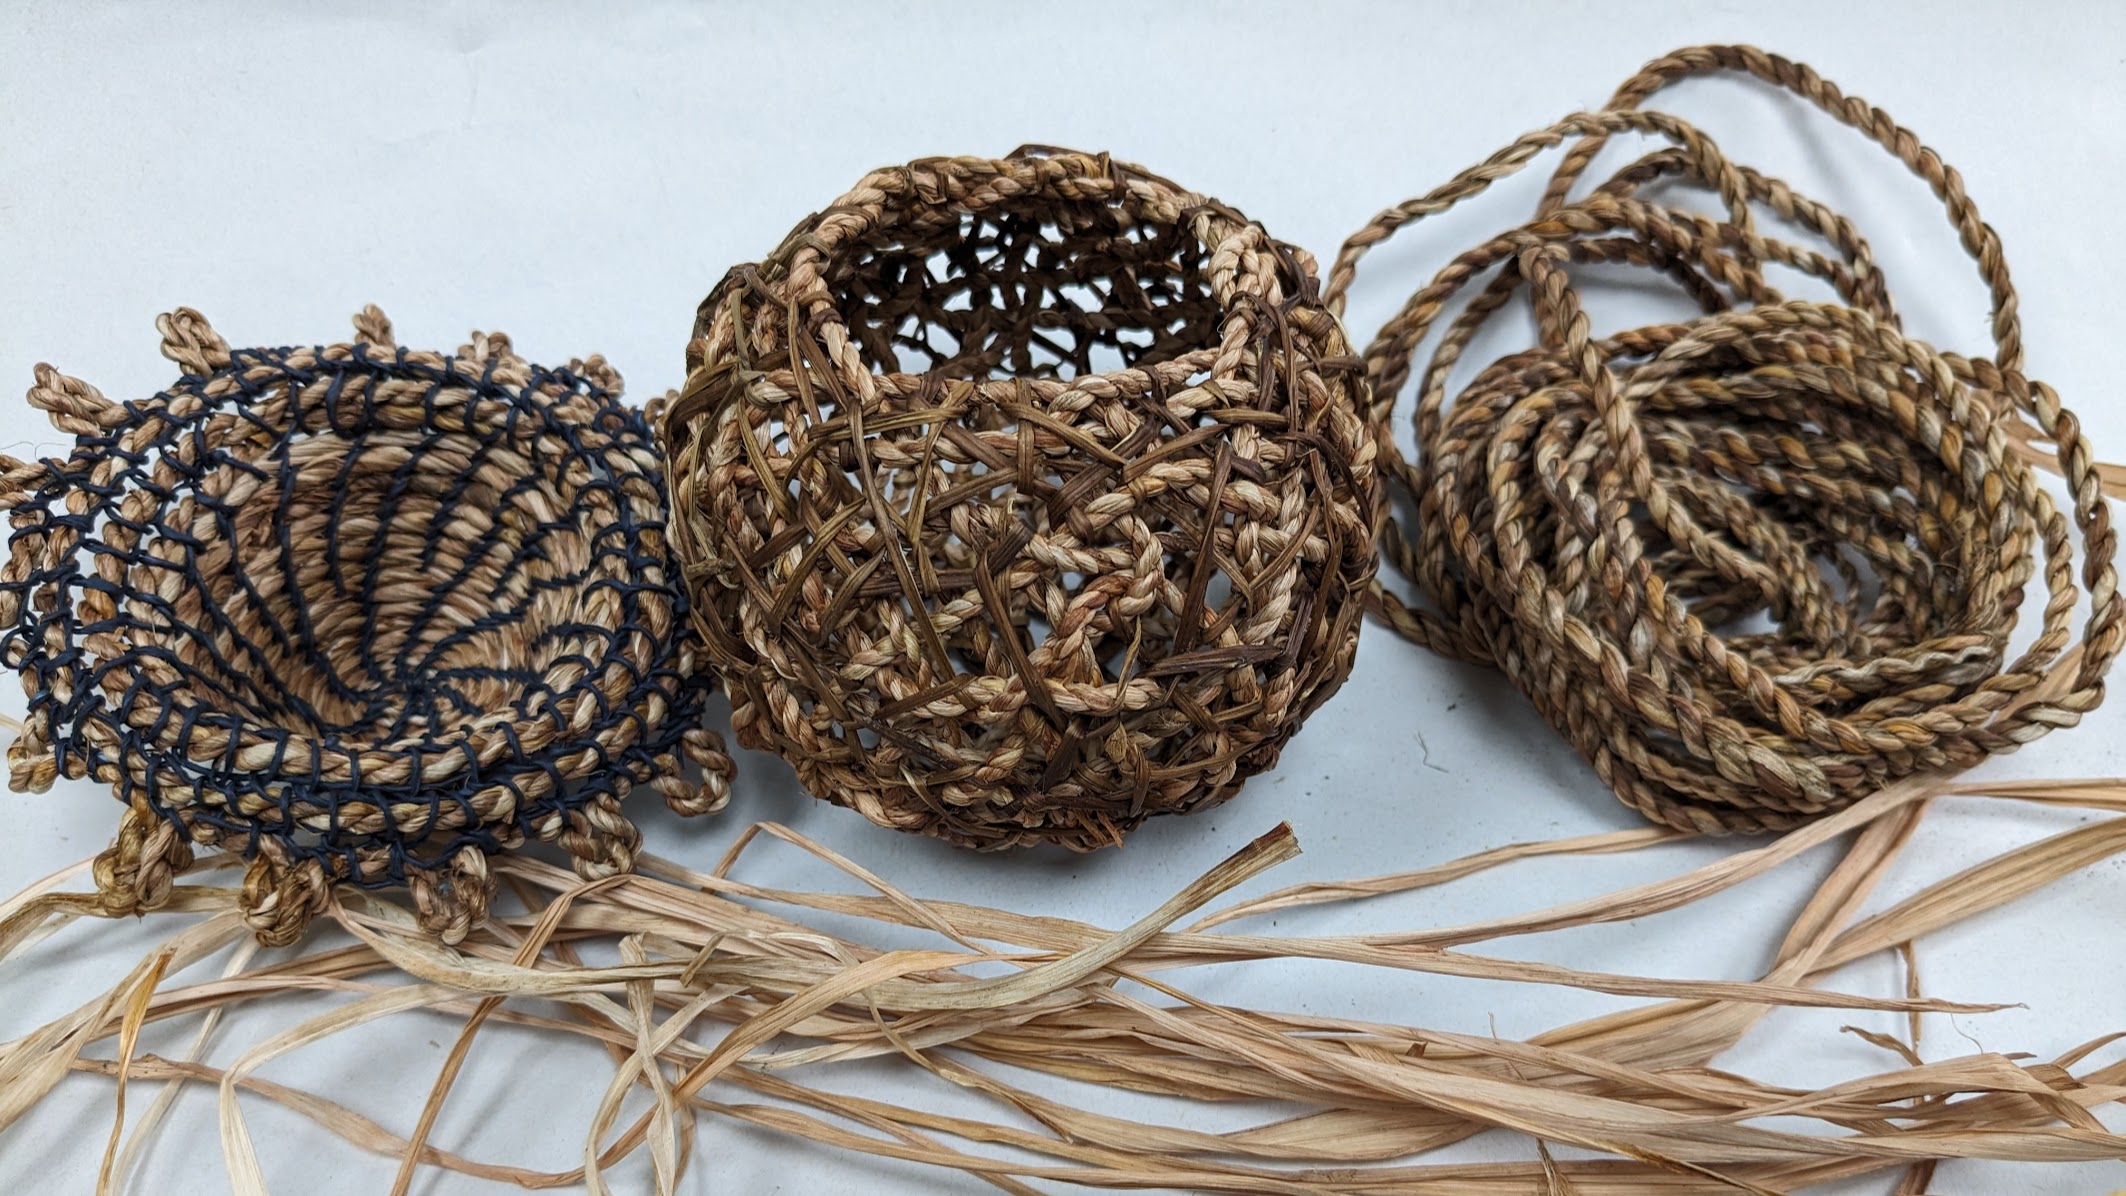 Basketry with foraged fibres